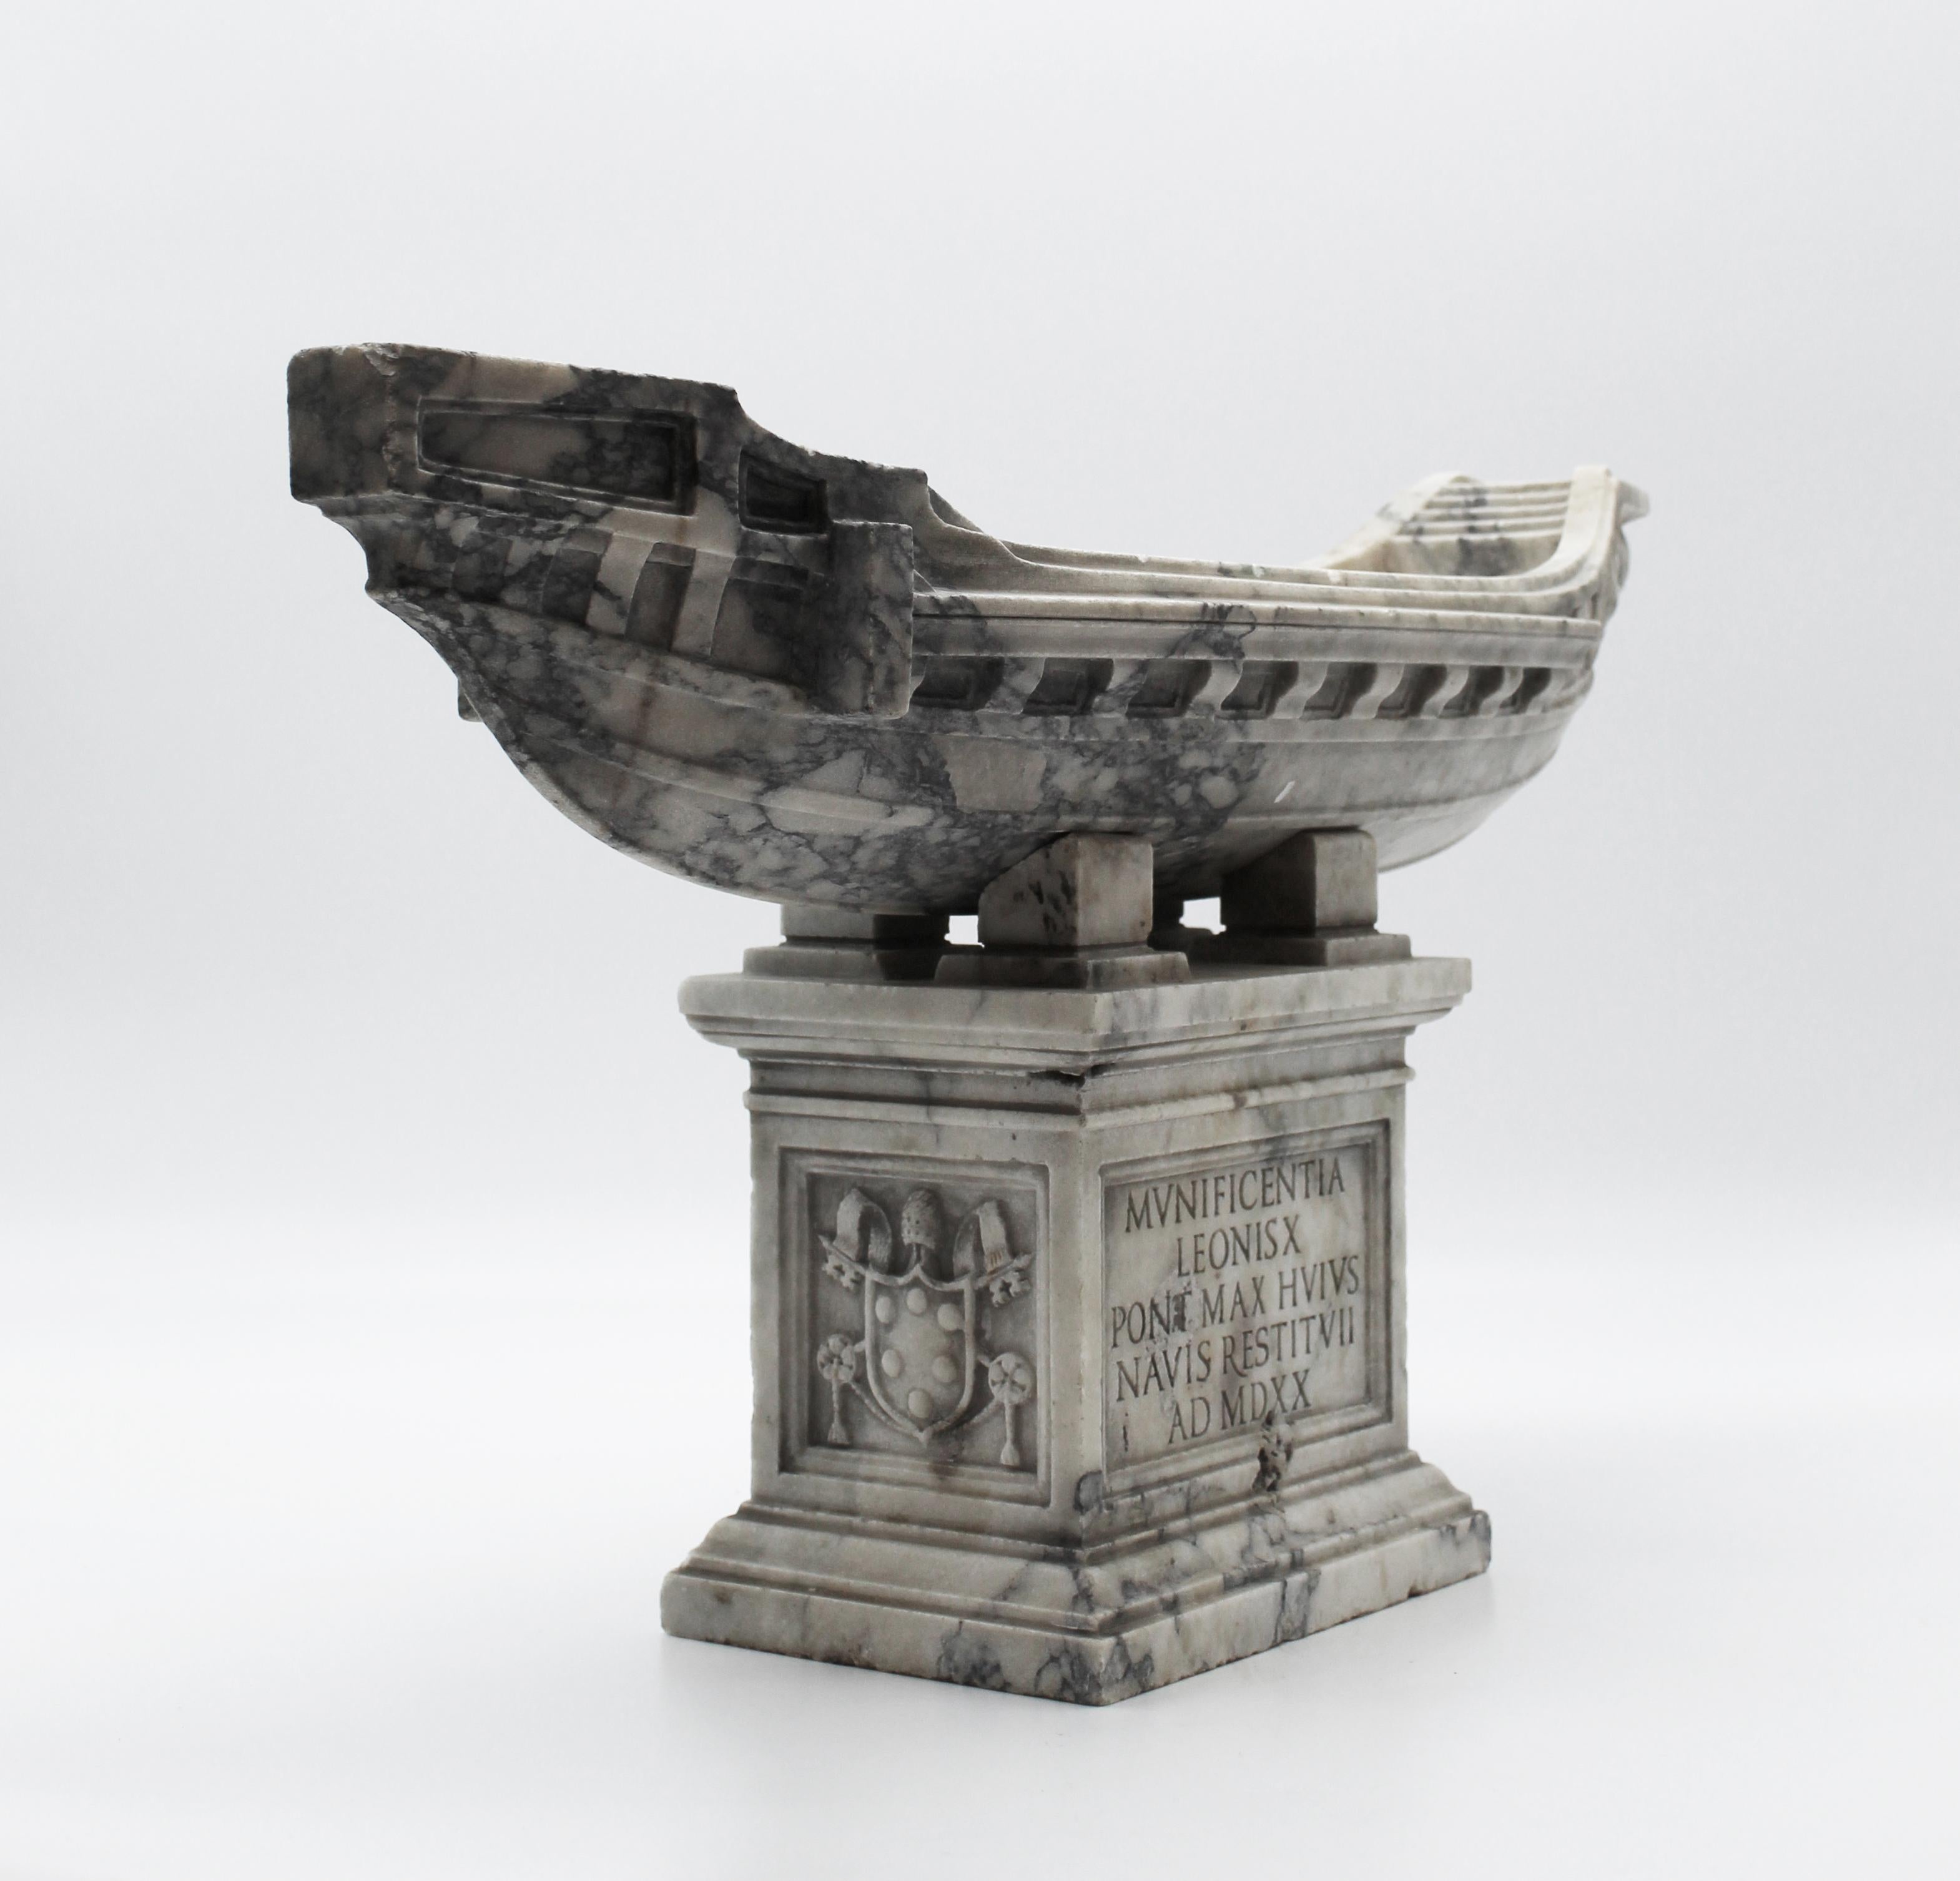 Statuary Marble 20th Century Italian White Marble Statuary Sculpture of Boat by Giancarlo Pace